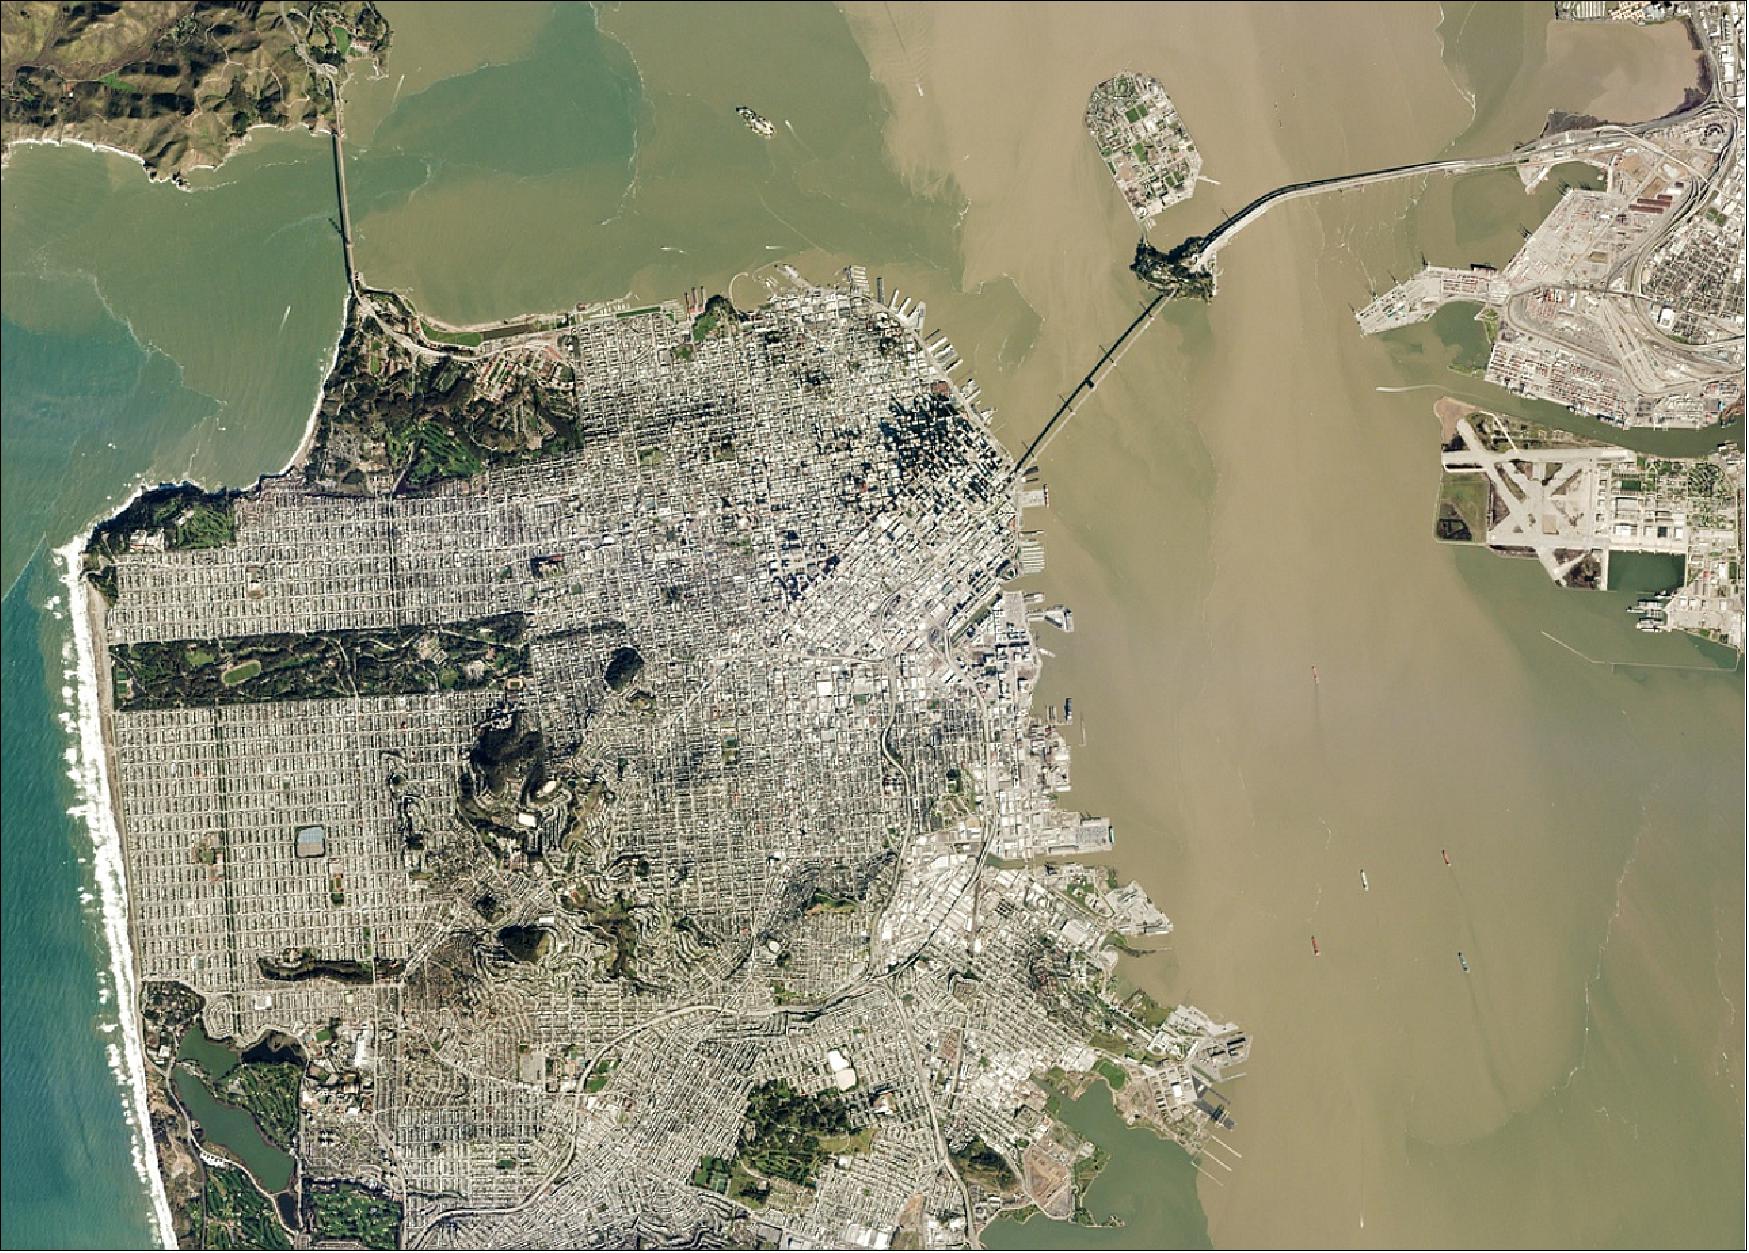 Figure 38: A clear view amid California's rainy winter of Planet's Headquarters, reveals more than just expanse of the Golden Gate Bridge, Park, and Bay Bridge, but the dramatic sediment pulled from the 11900 km2 of the San Francisco Bay watershed. The image was acquired on Feb. 11, 2017 (image credit: Planet)